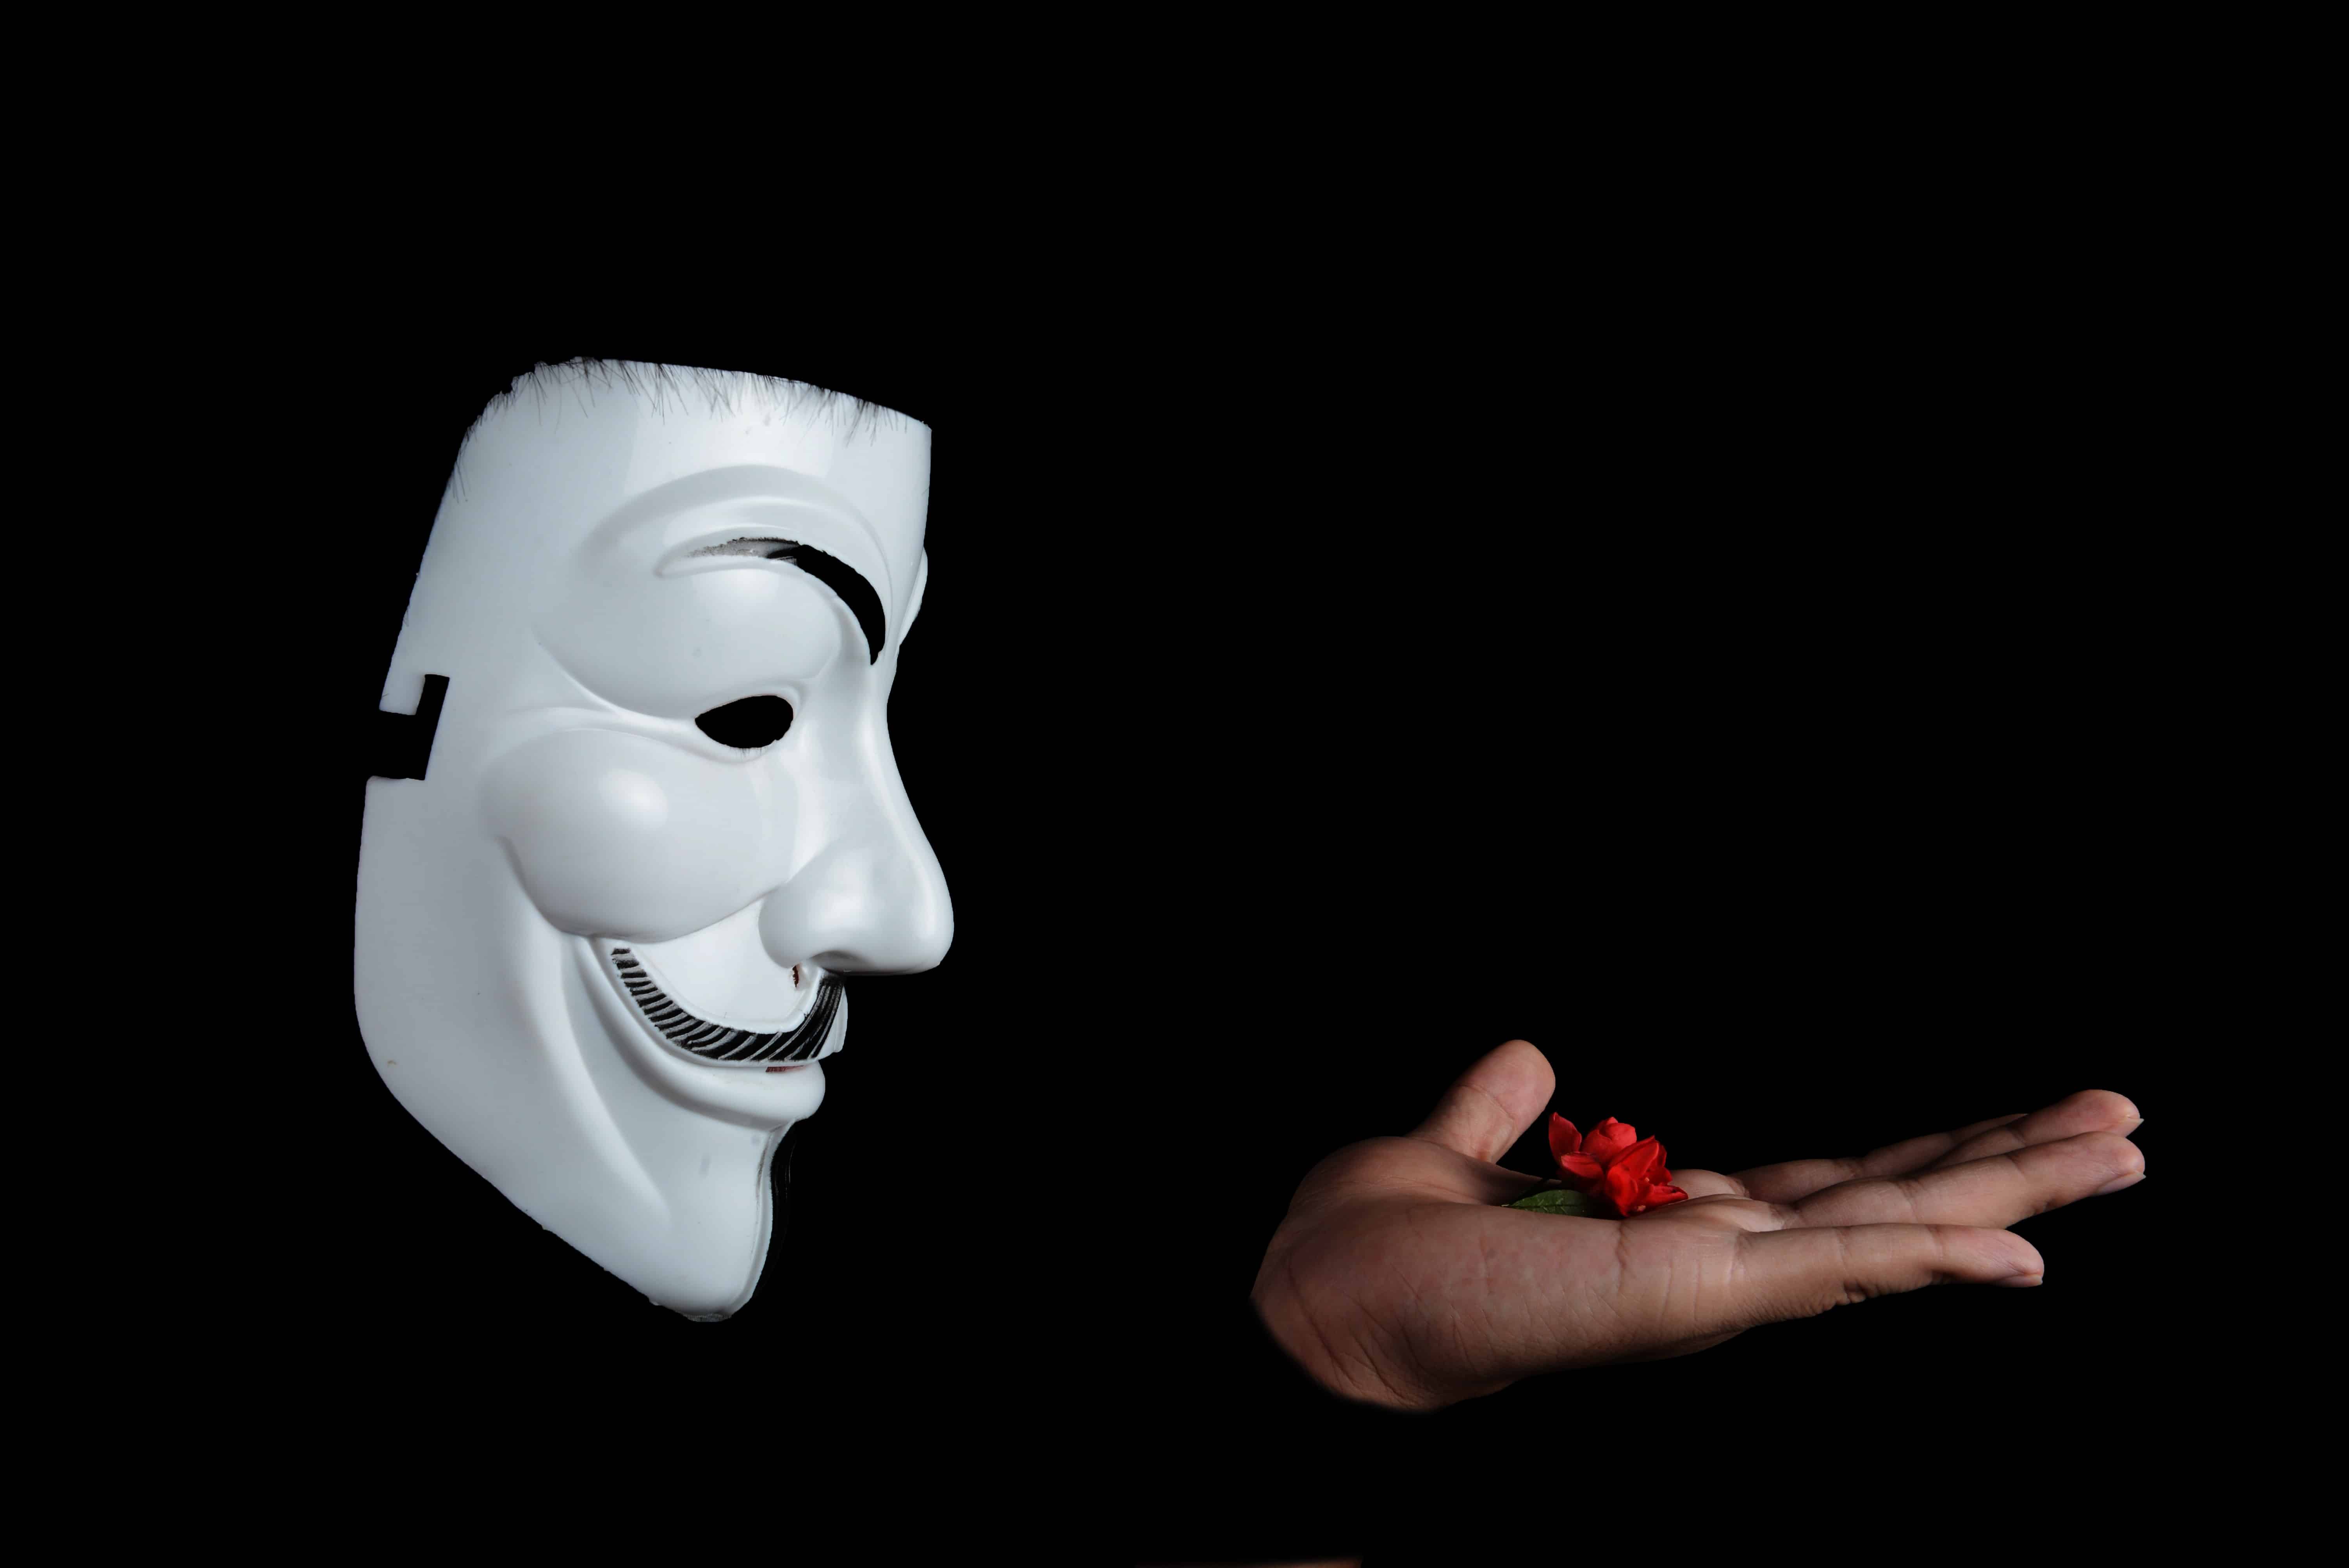 A person with an anonymouse mask holds a red flower in their palm